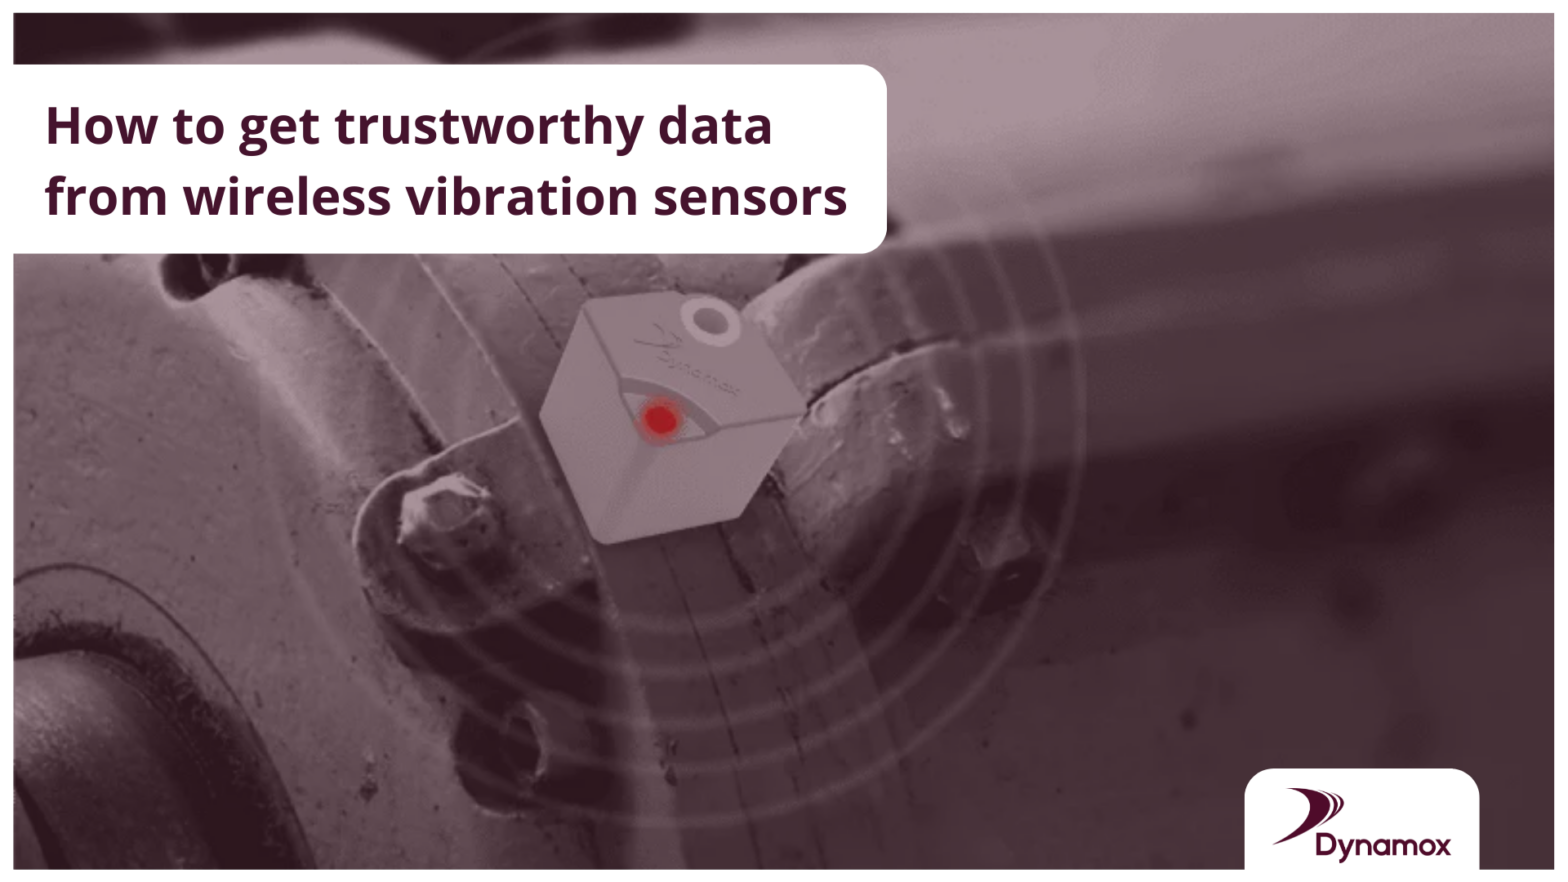 How to get trustworthy data from wireless vibration sensors